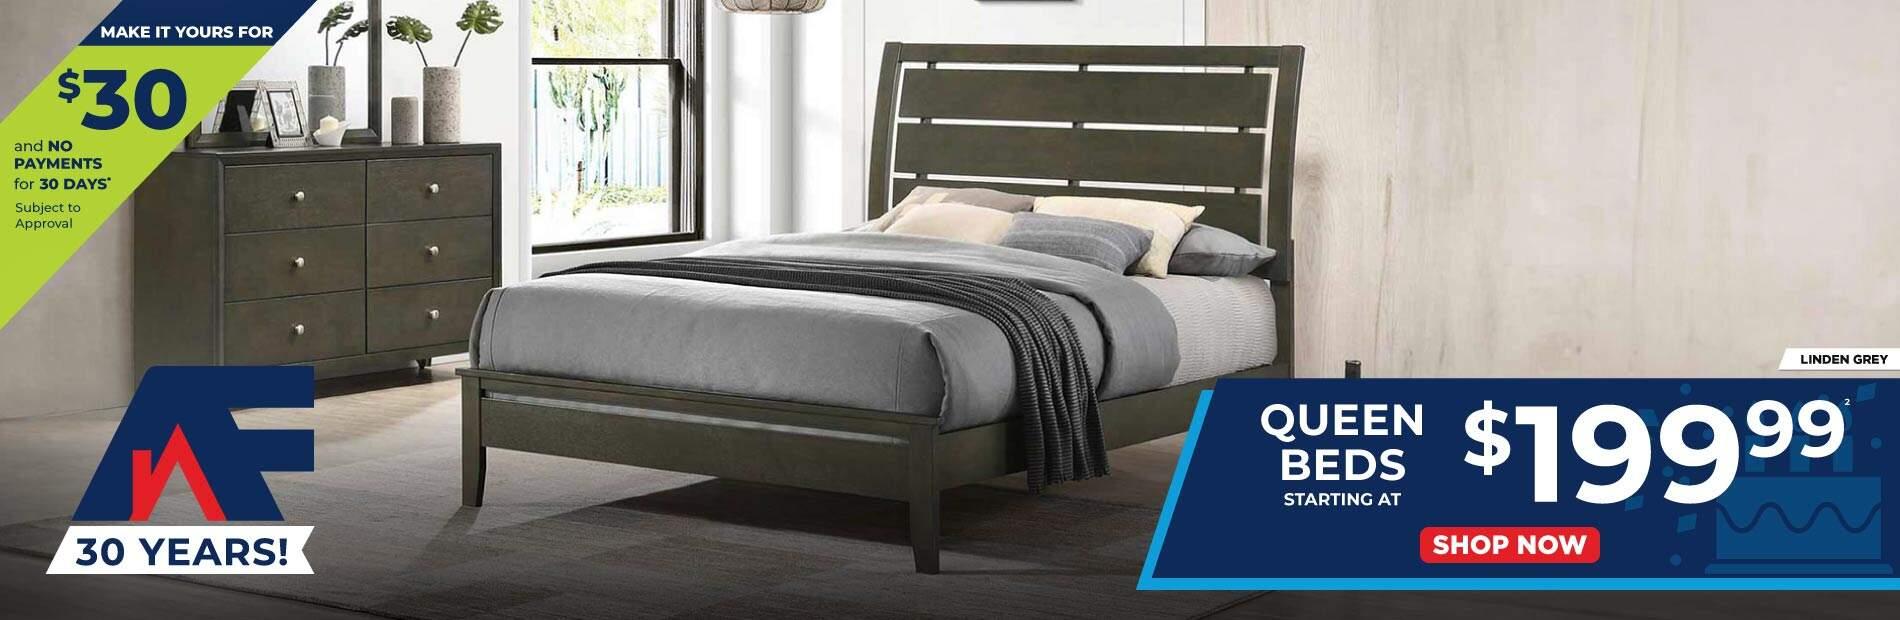 Make it yours $30 and no payments for 30 days subject to approval. 30 Years! Queen beds starting at $199.99. 2. Shop Now. Linden Grey